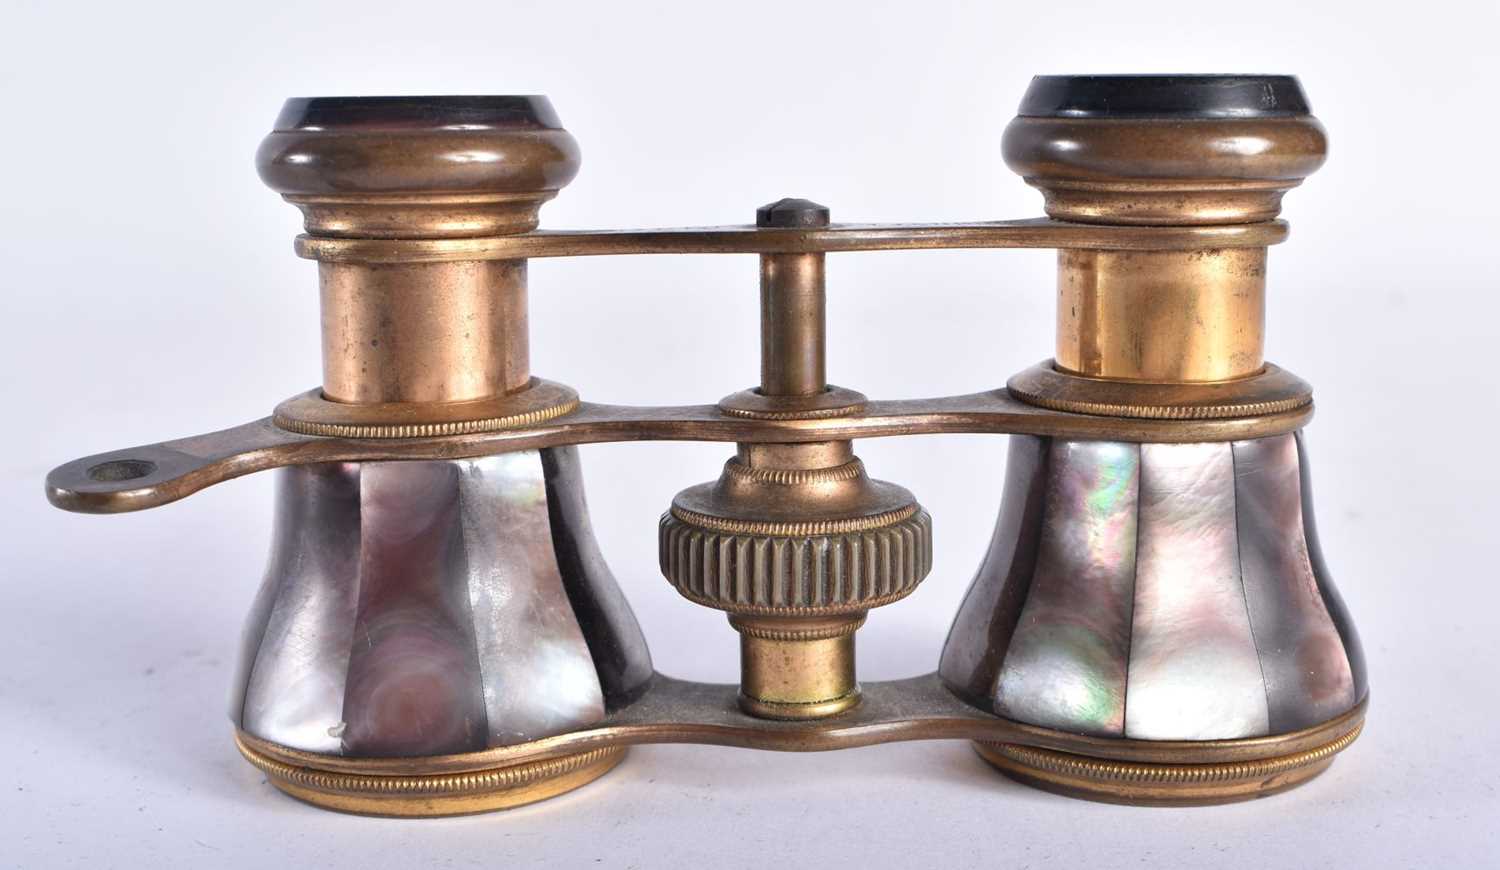 A PAIR OF MOTHER OF PEARL OPERA GLASSES. 6 cm x 10 cm extended.